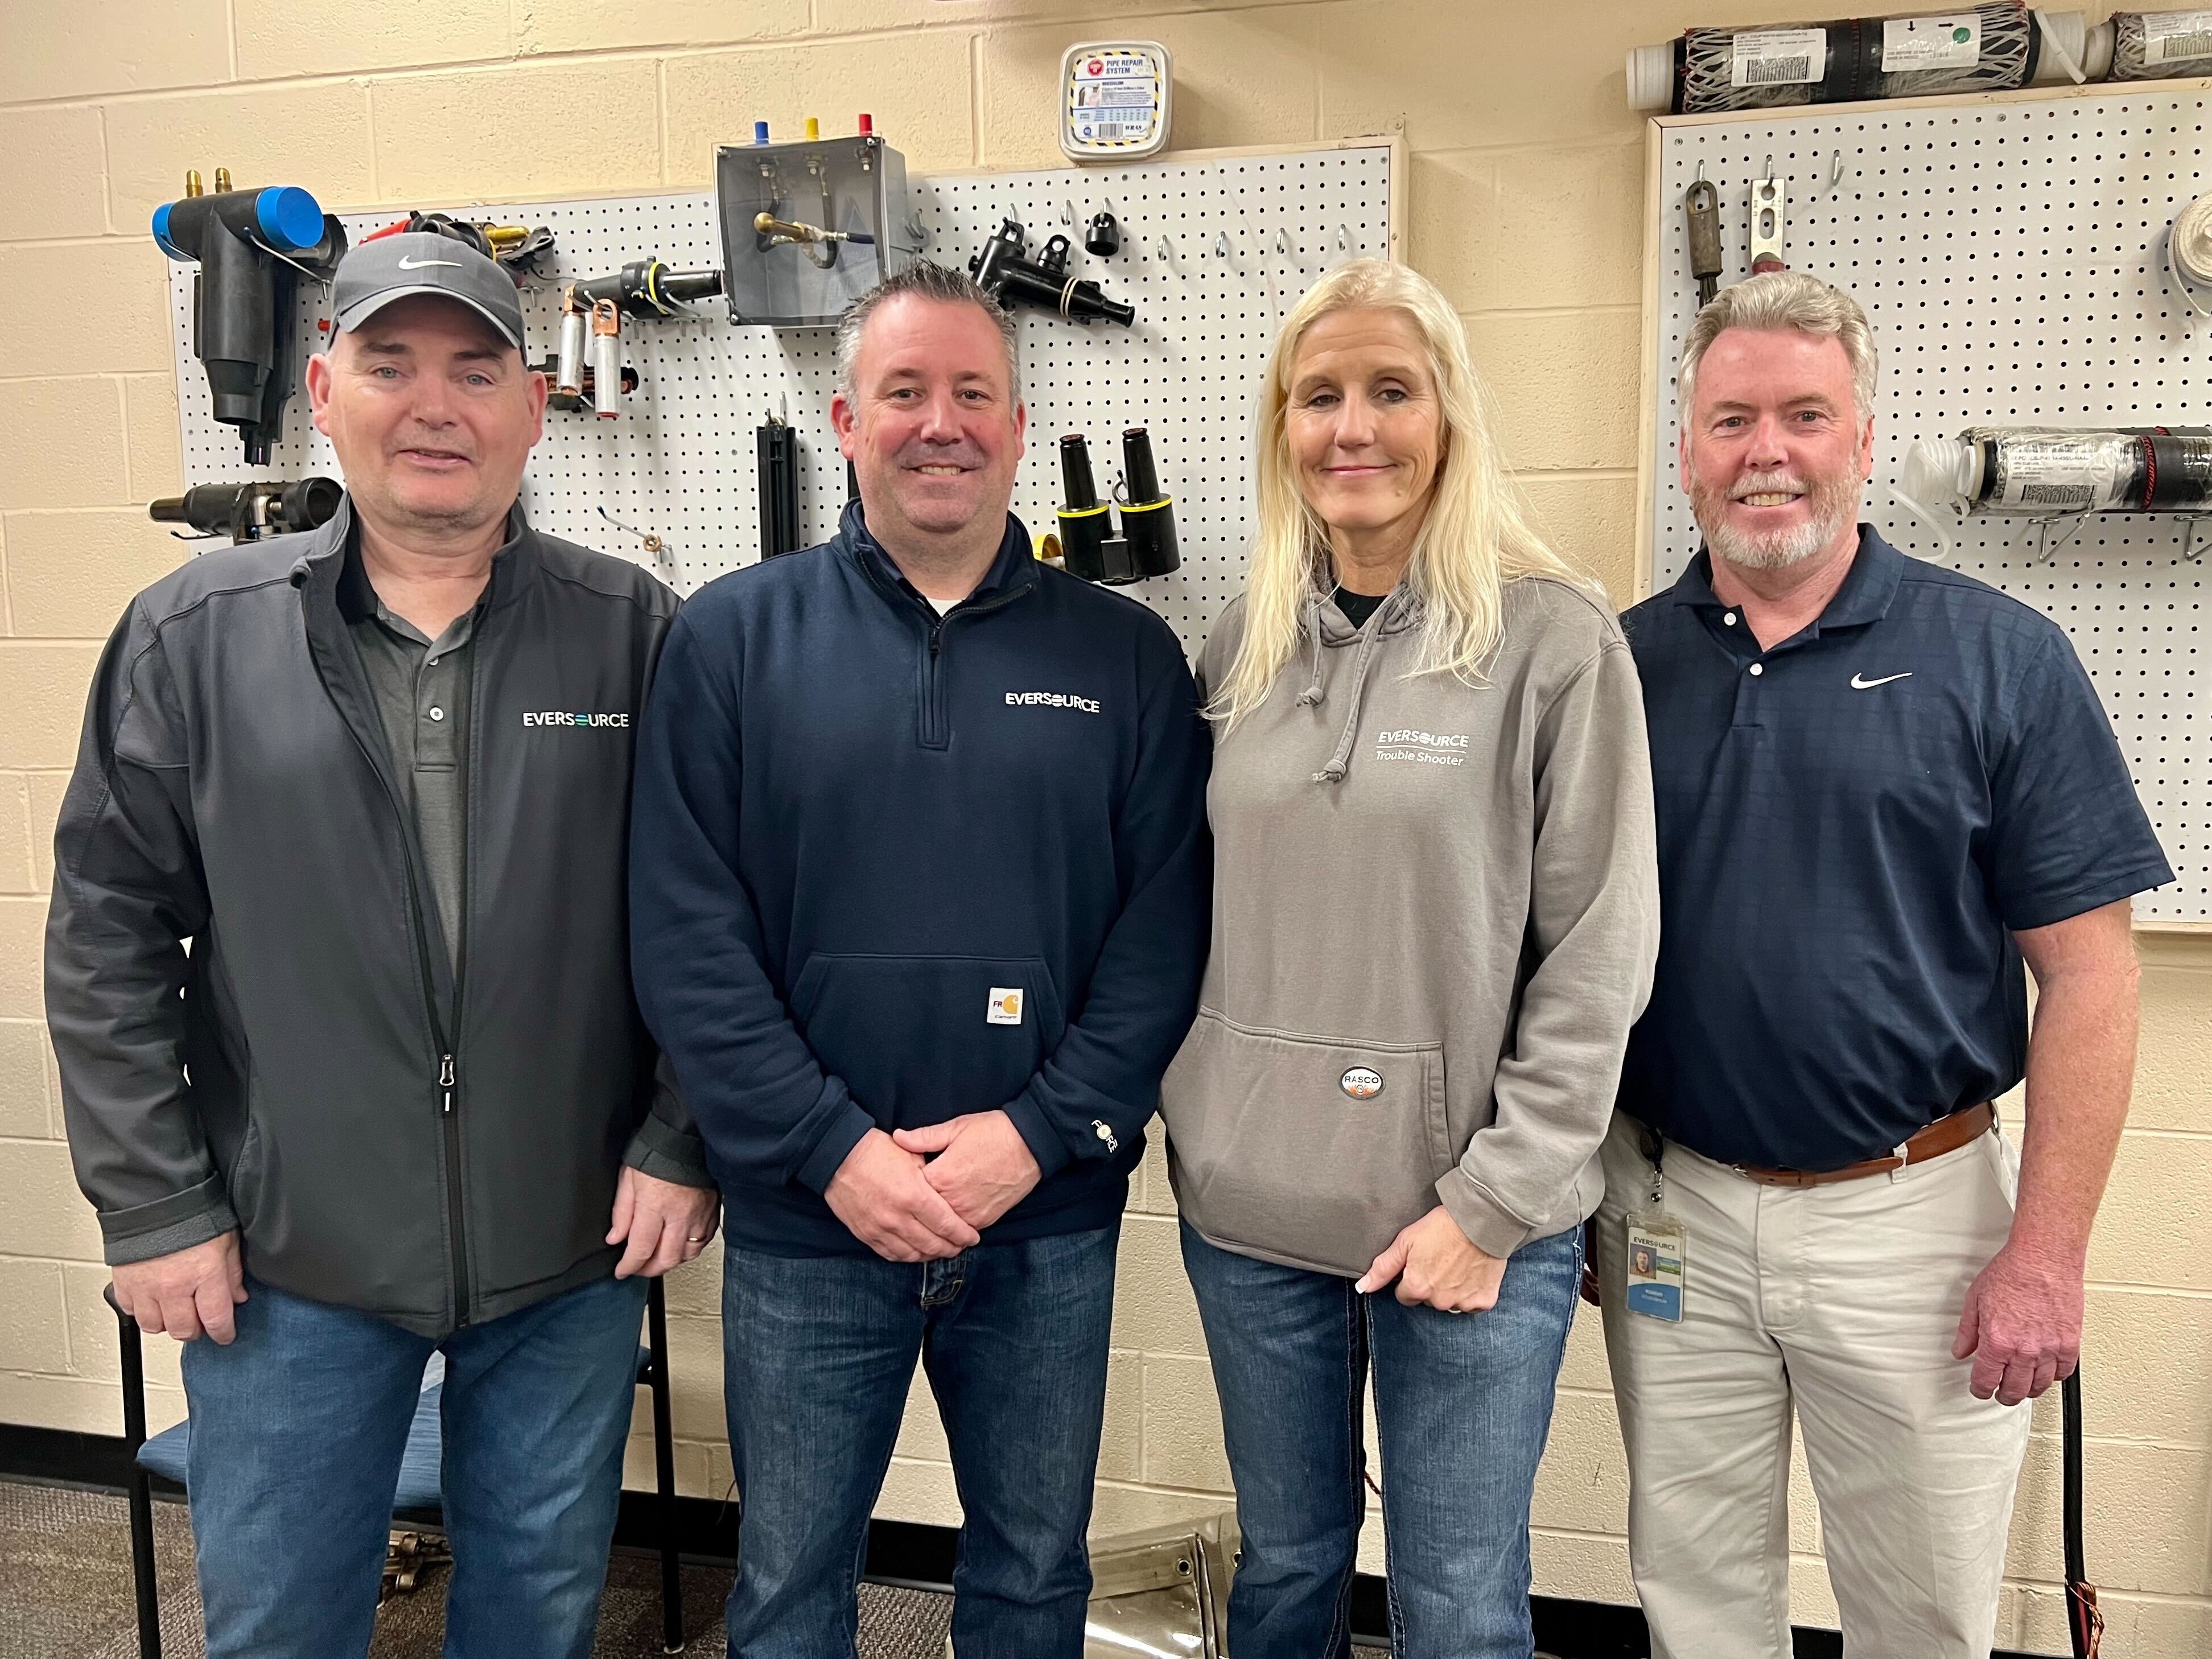 Electric Service Manager Tom Schlehuber, Electric Operations Director Mark Baldwin, and Electric System Operations Director Bob O’Loughlin joined Tammy and leadership from across the company to celebrate her historic achievement on April 14, 2022.